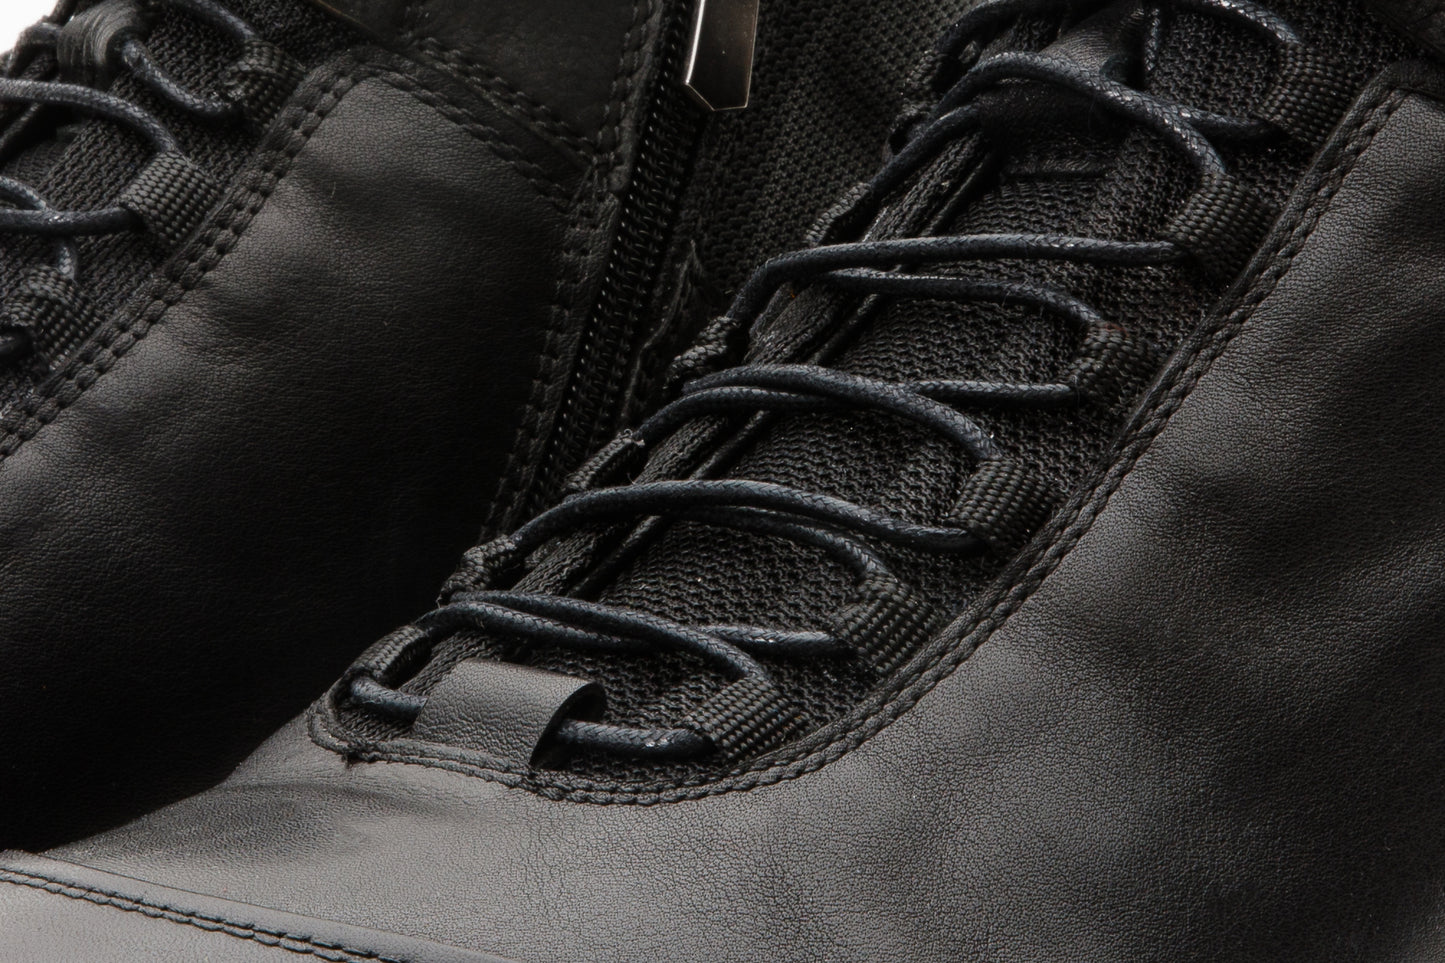 The Houston Leather Black Lace-Up Casual Men Boot with a Zipper